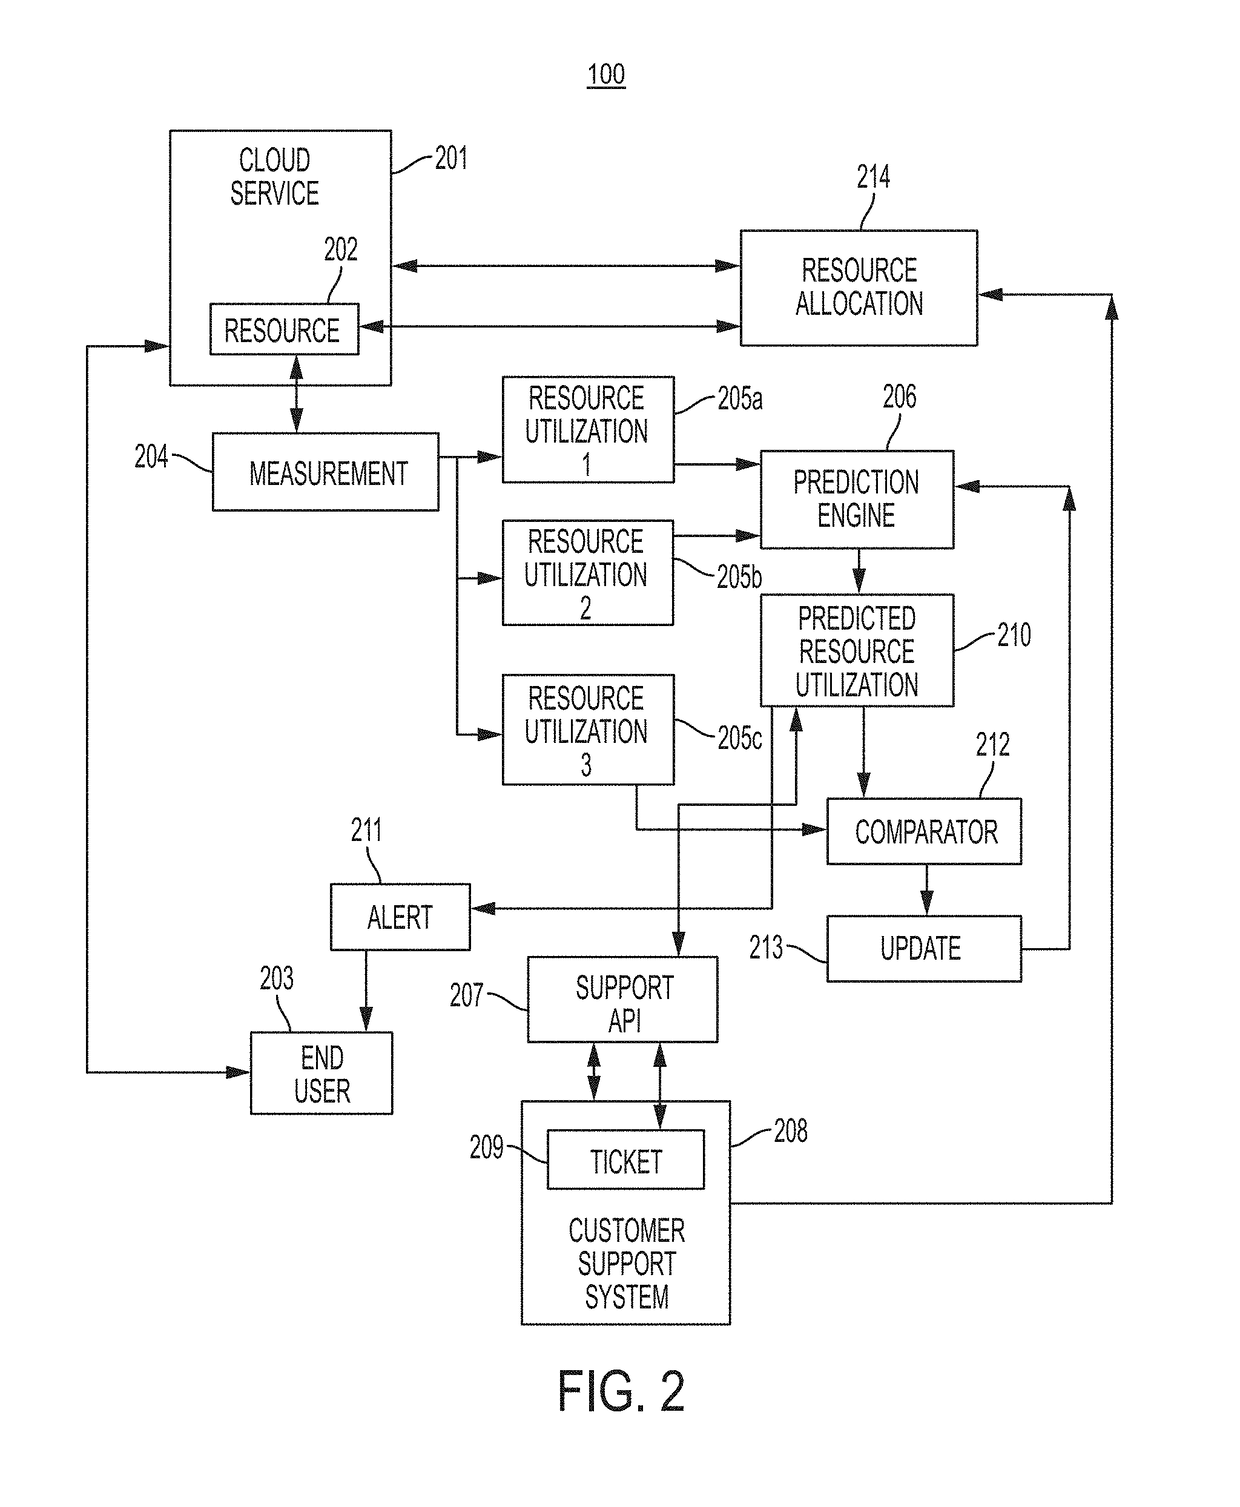 Systems and methods for updating the configuration of a cloud service